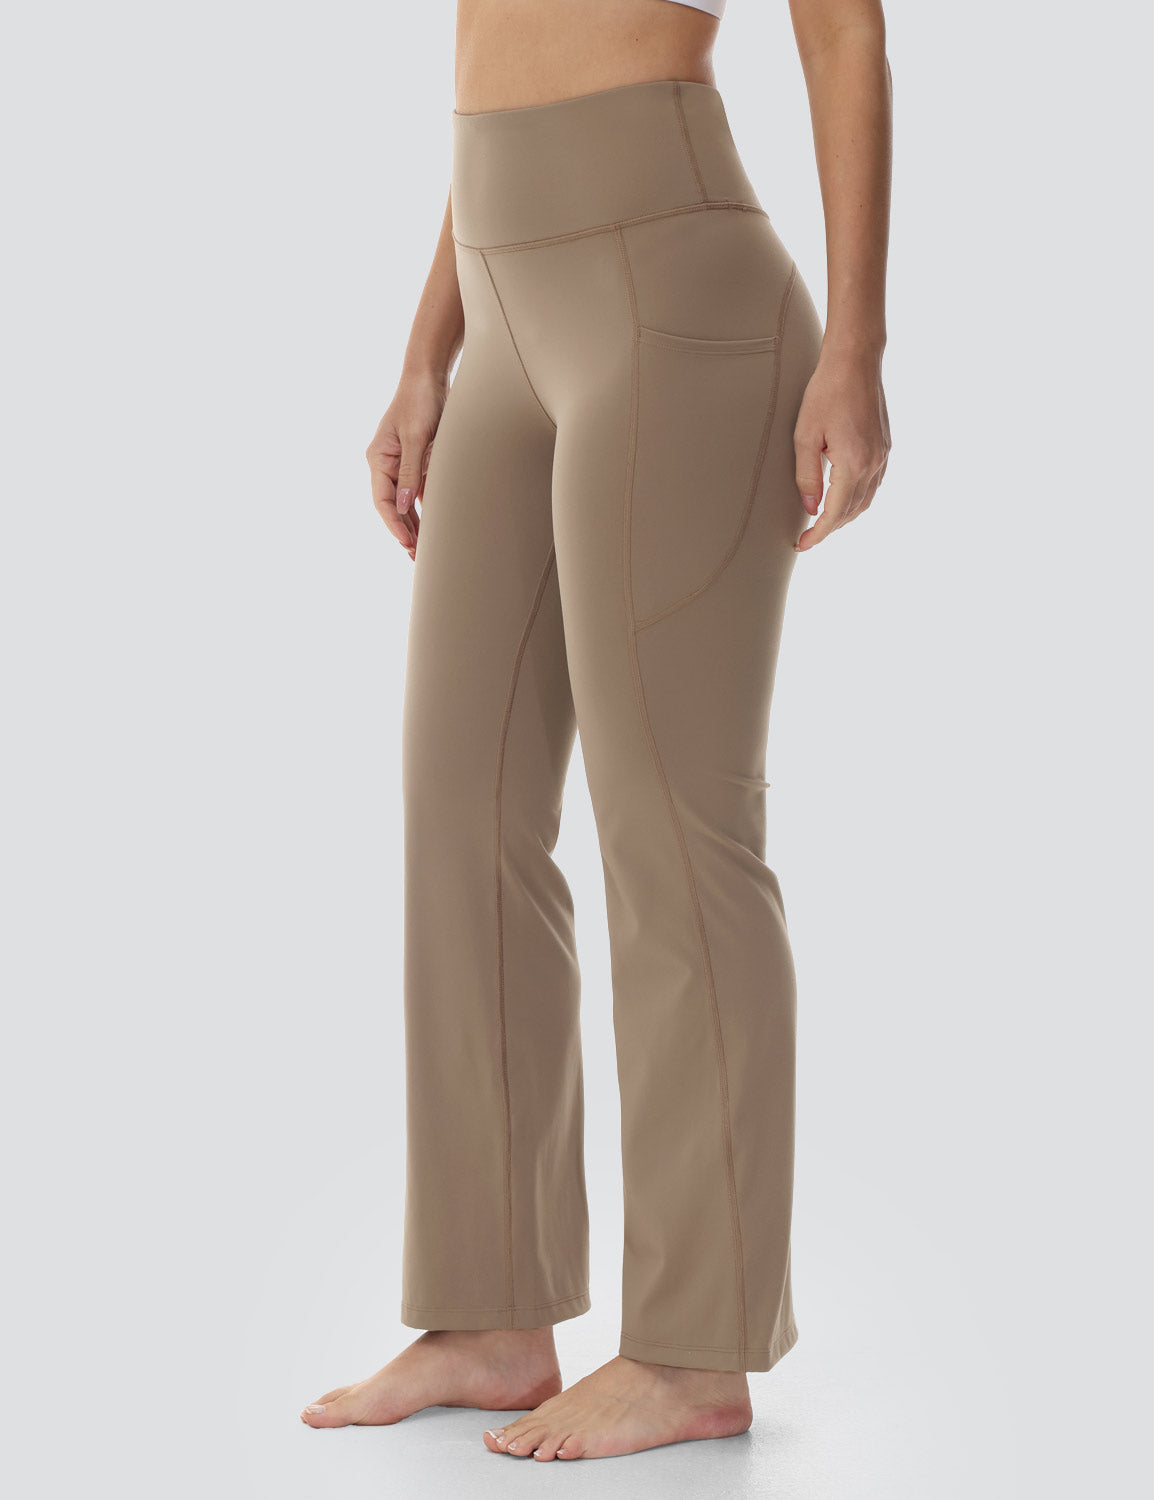 Baleaf Women's Comfortable High-Rise Pocketed Flared Pants Cocoa Crème Side